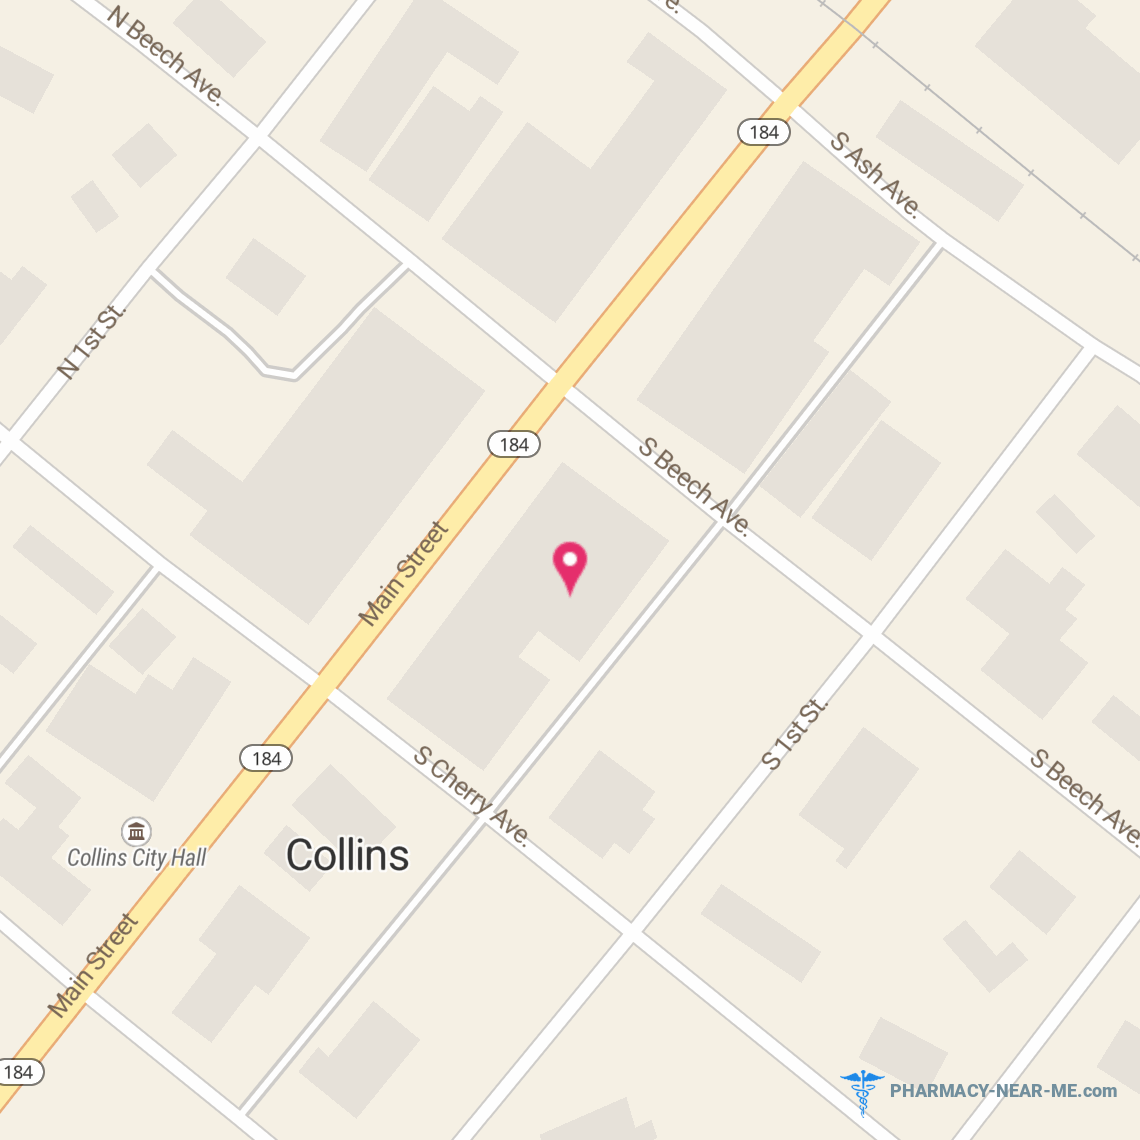 C & C DRUGS INC - Pharmacy Hours, Phone, Reviews & Information: 204 Main Street, Collins, Mississippi 39428, United States